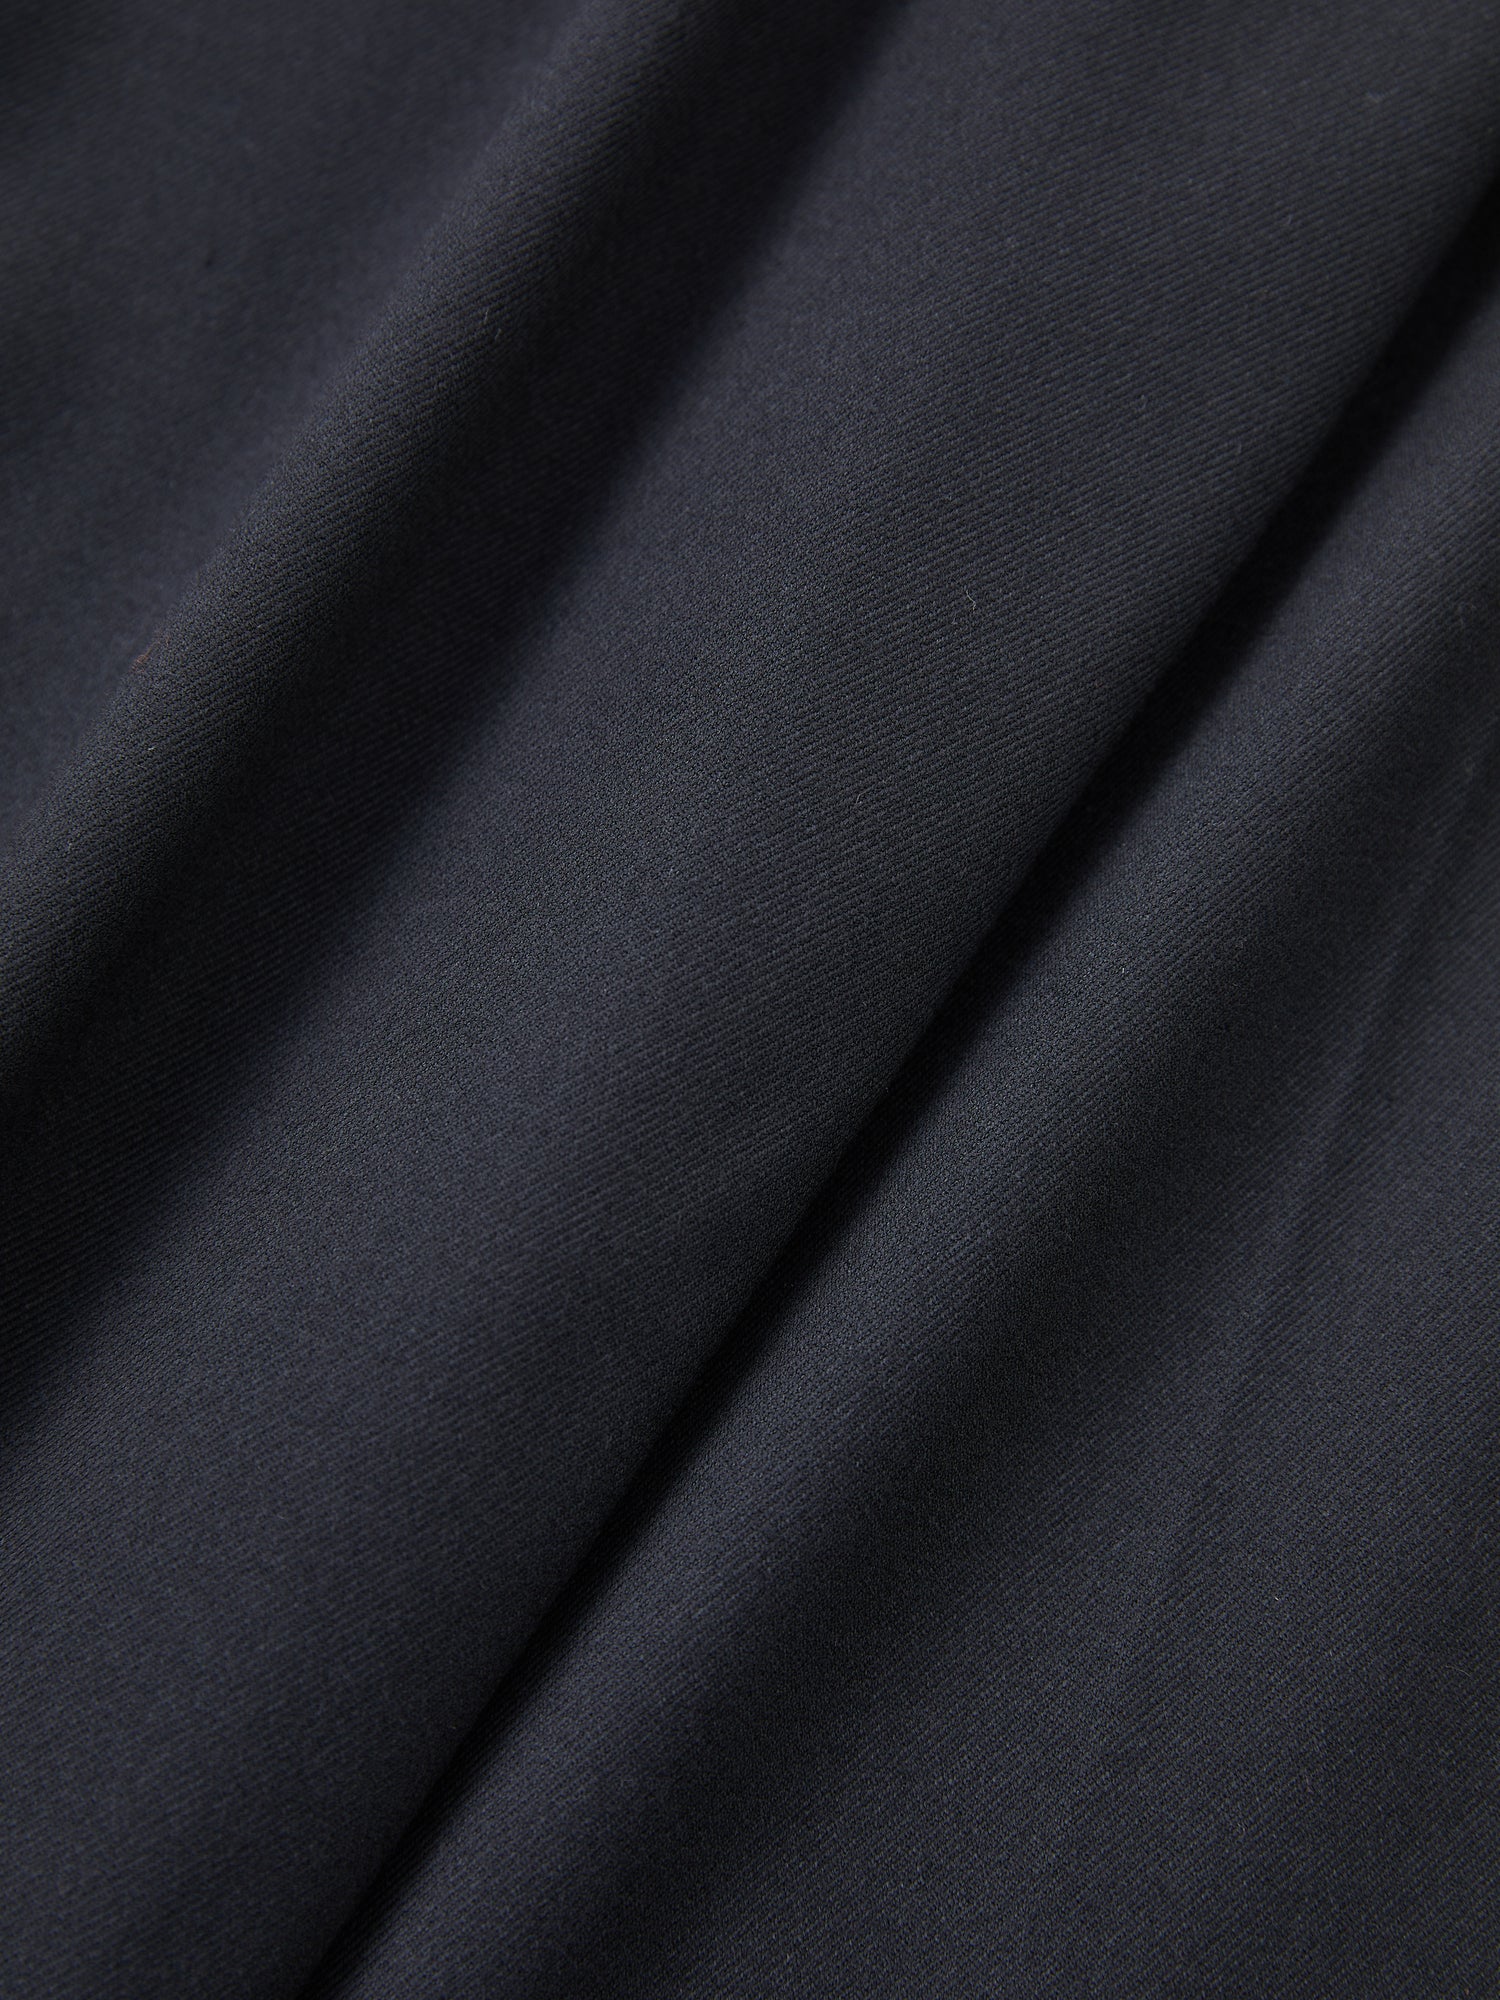 A close up image of Found Pleated Trousers made of black fabric.